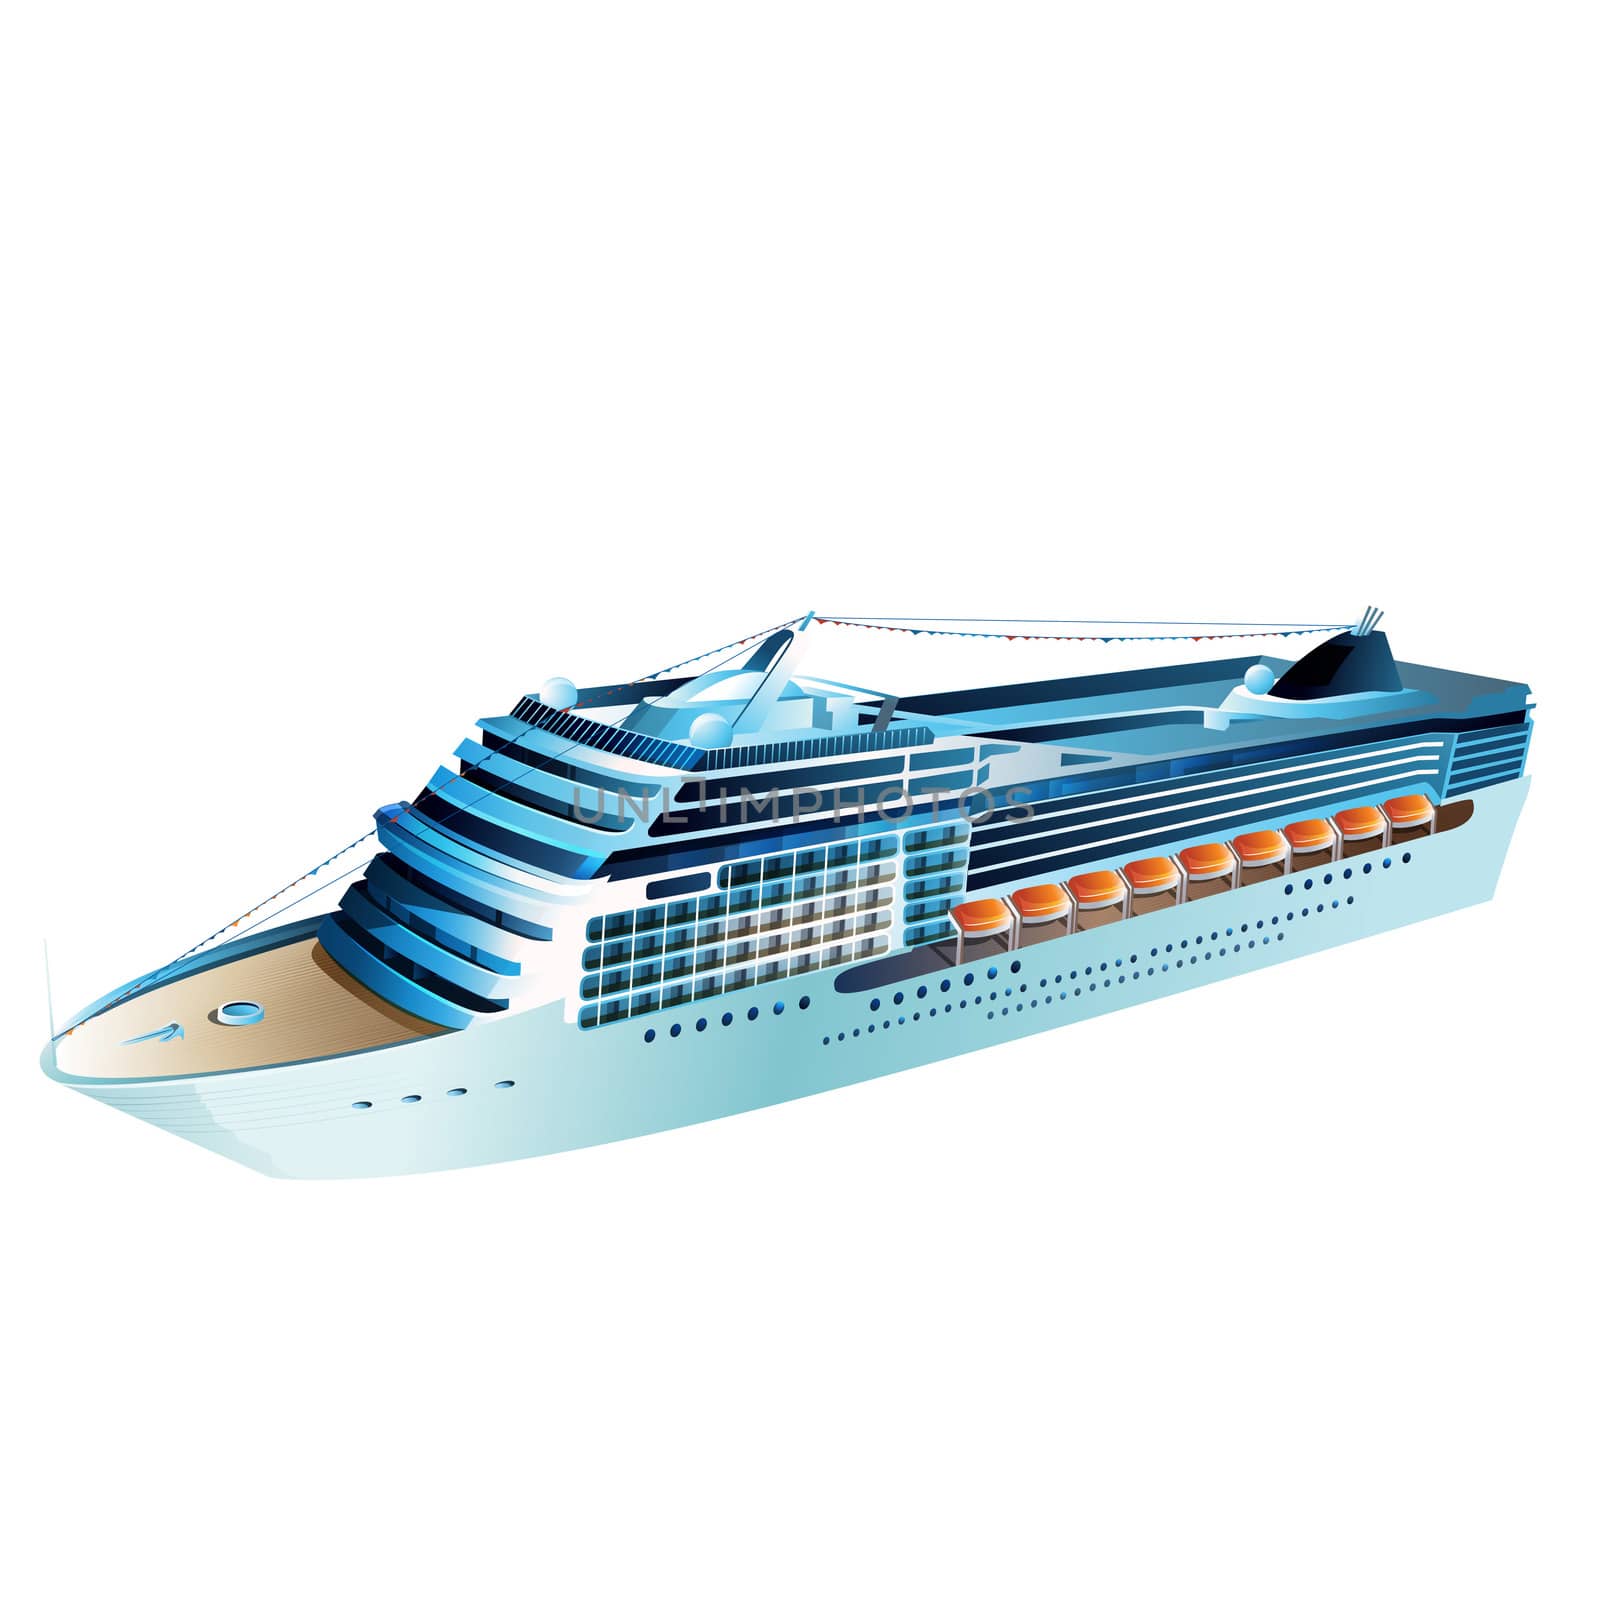 Cruise Liner Illustration by ConceptCafe